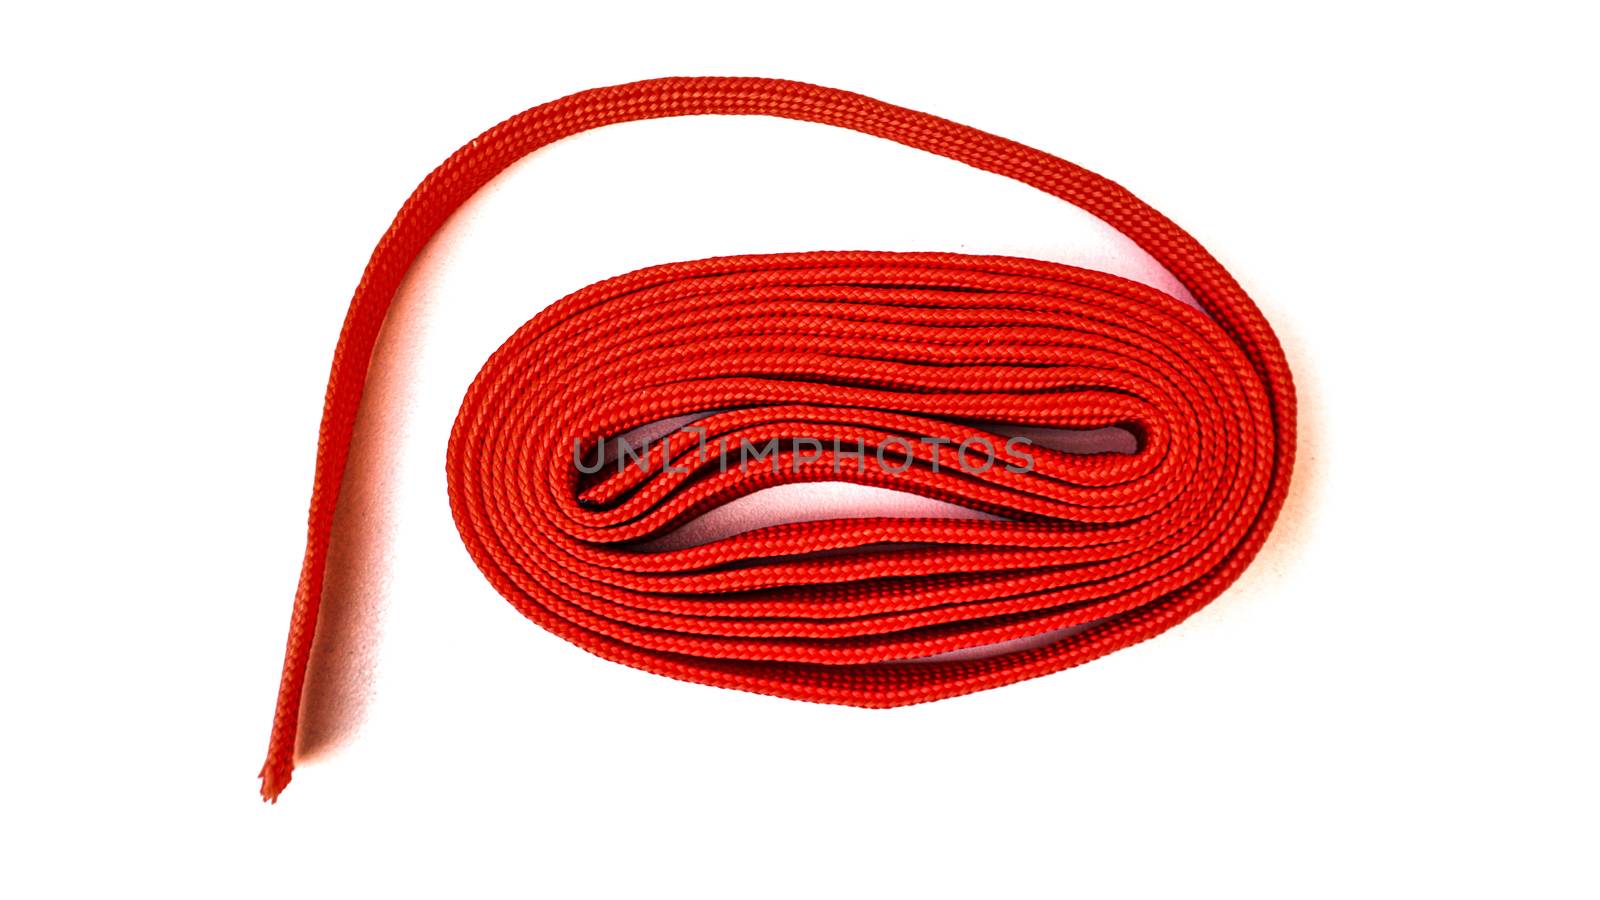 Red rope on white background. Fabric rope in red color folded in by sonandonures